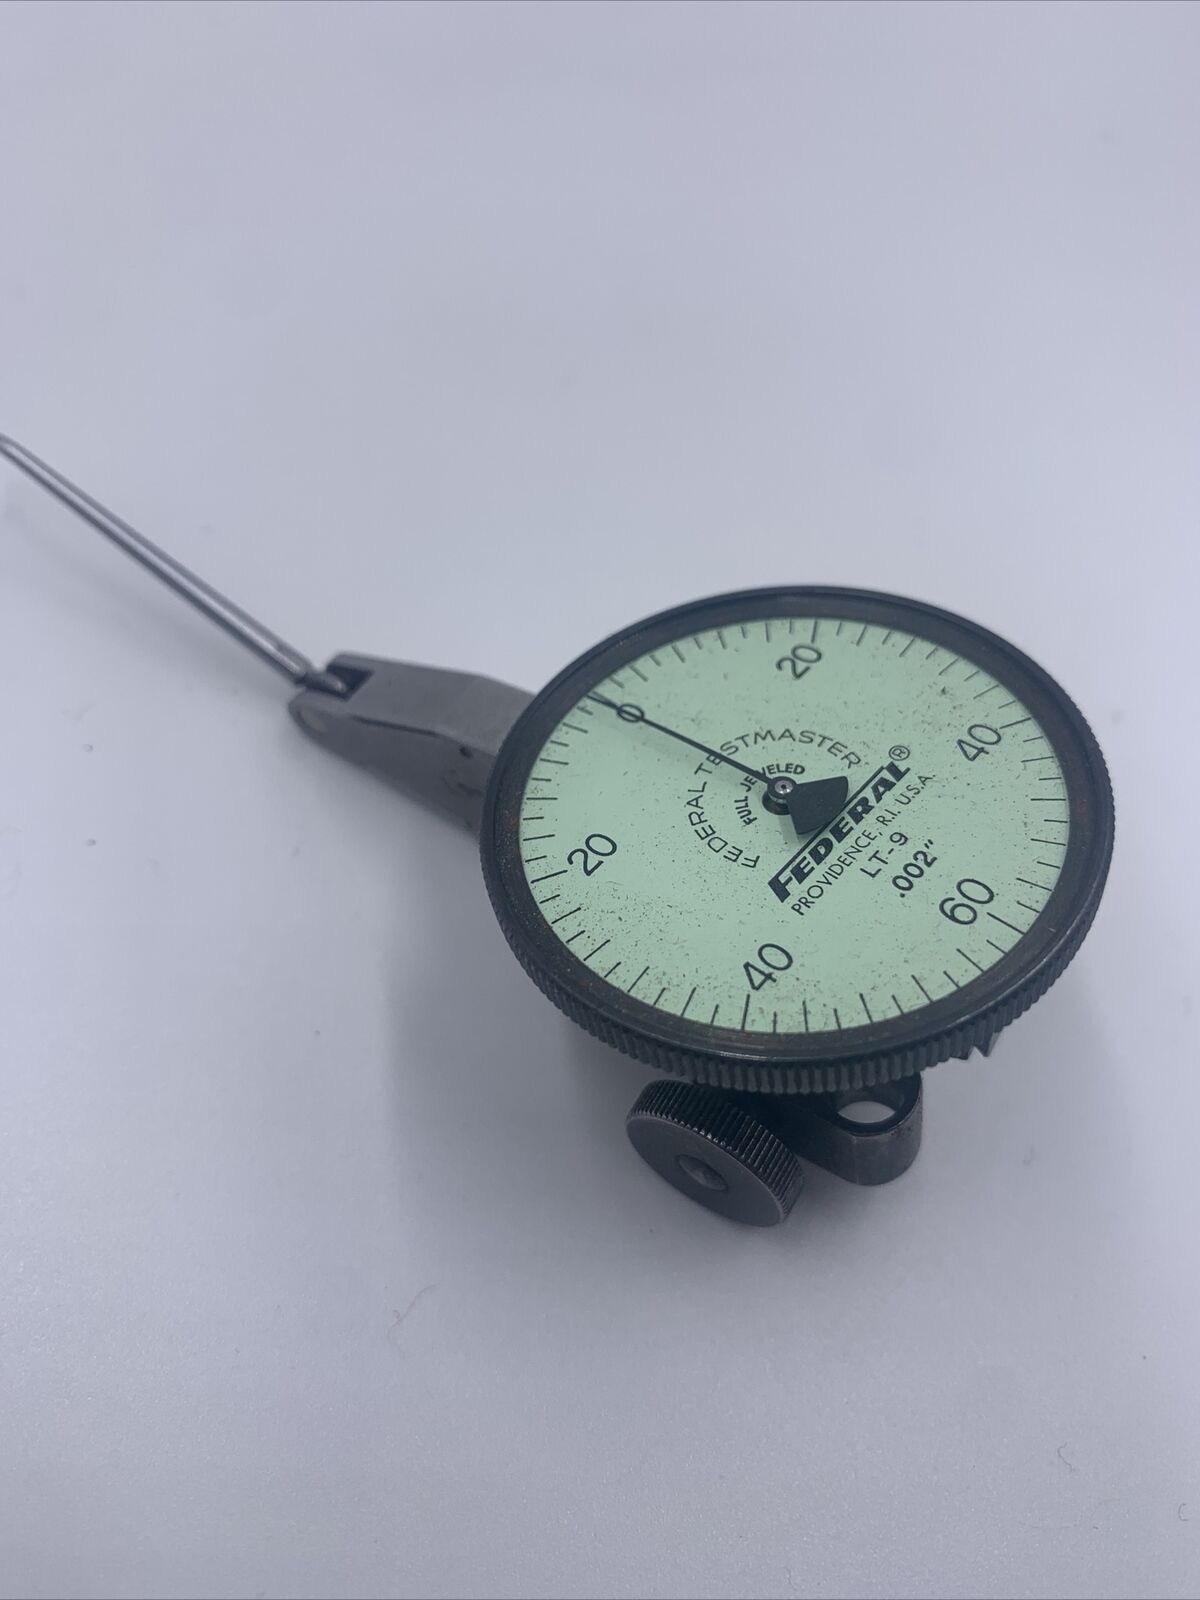 #7 Federal Testmaster Dial Indicator Lt-9 .002